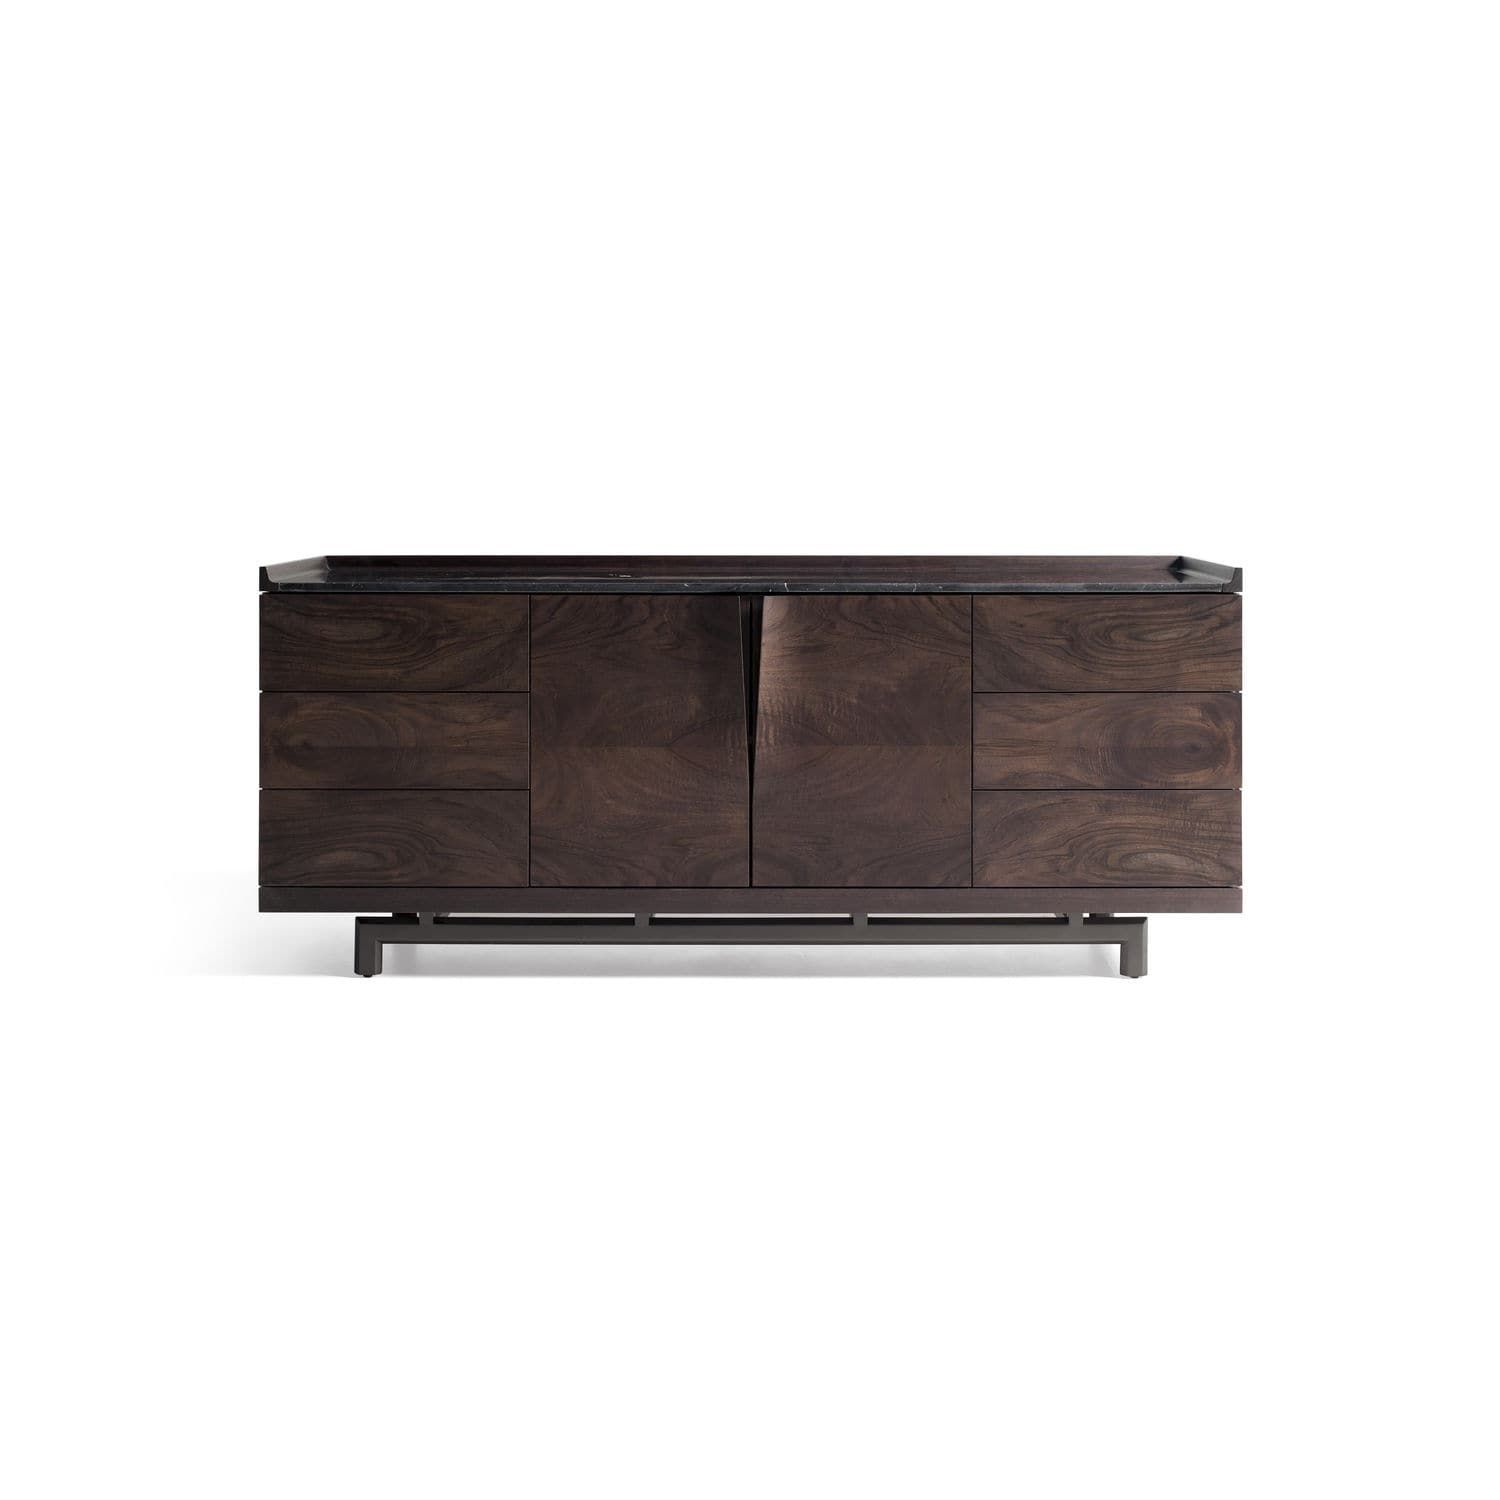 Contemporary Sideboard / Walnut / Contract – Alternative: Manta Within Most Popular Walnut Finish Contempo Sideboards (Photo 16 of 20)